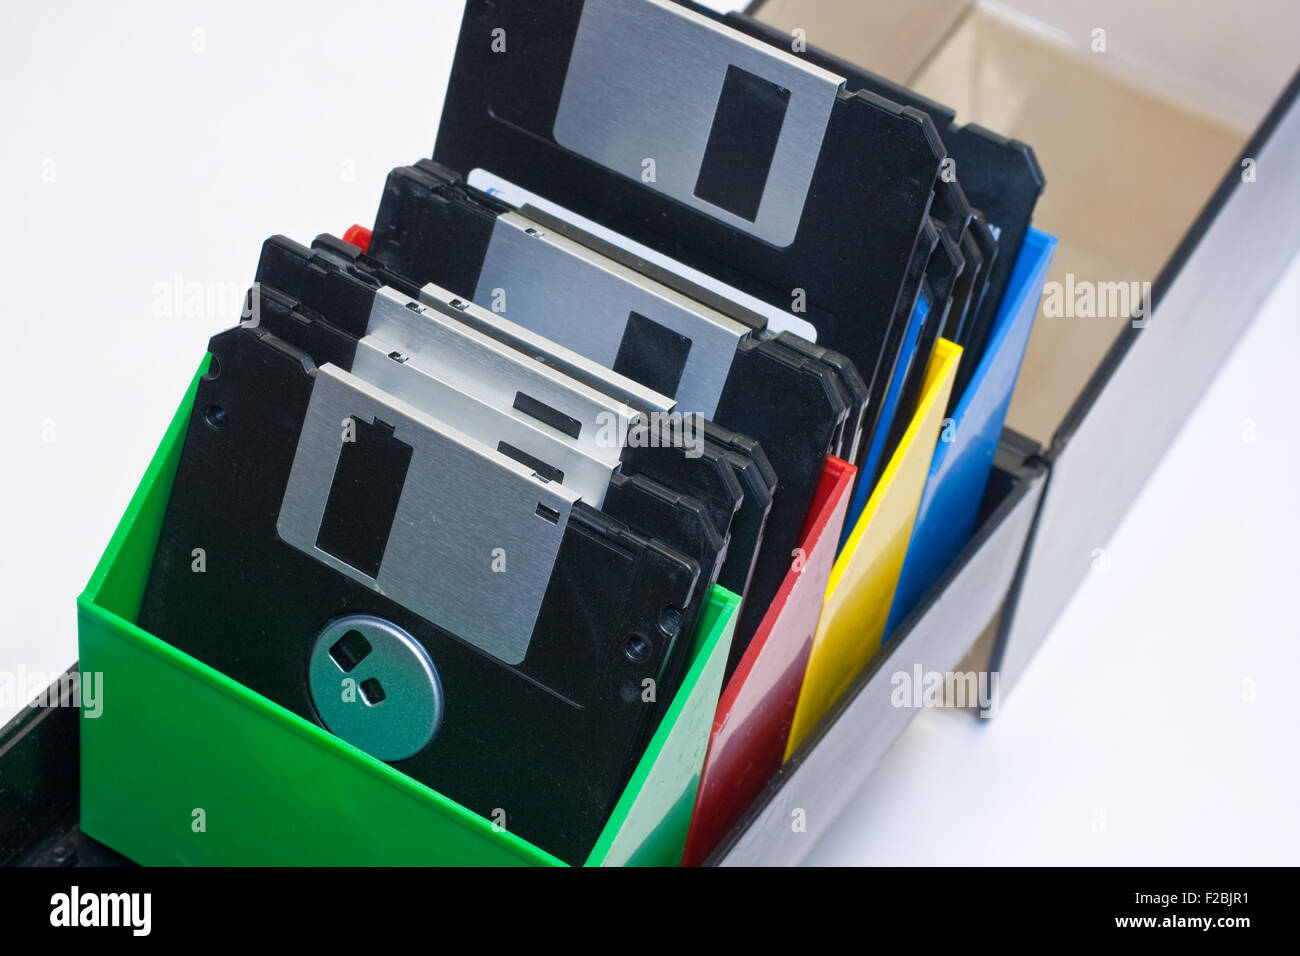 Floppy disk in a box container. White background Stock Photo